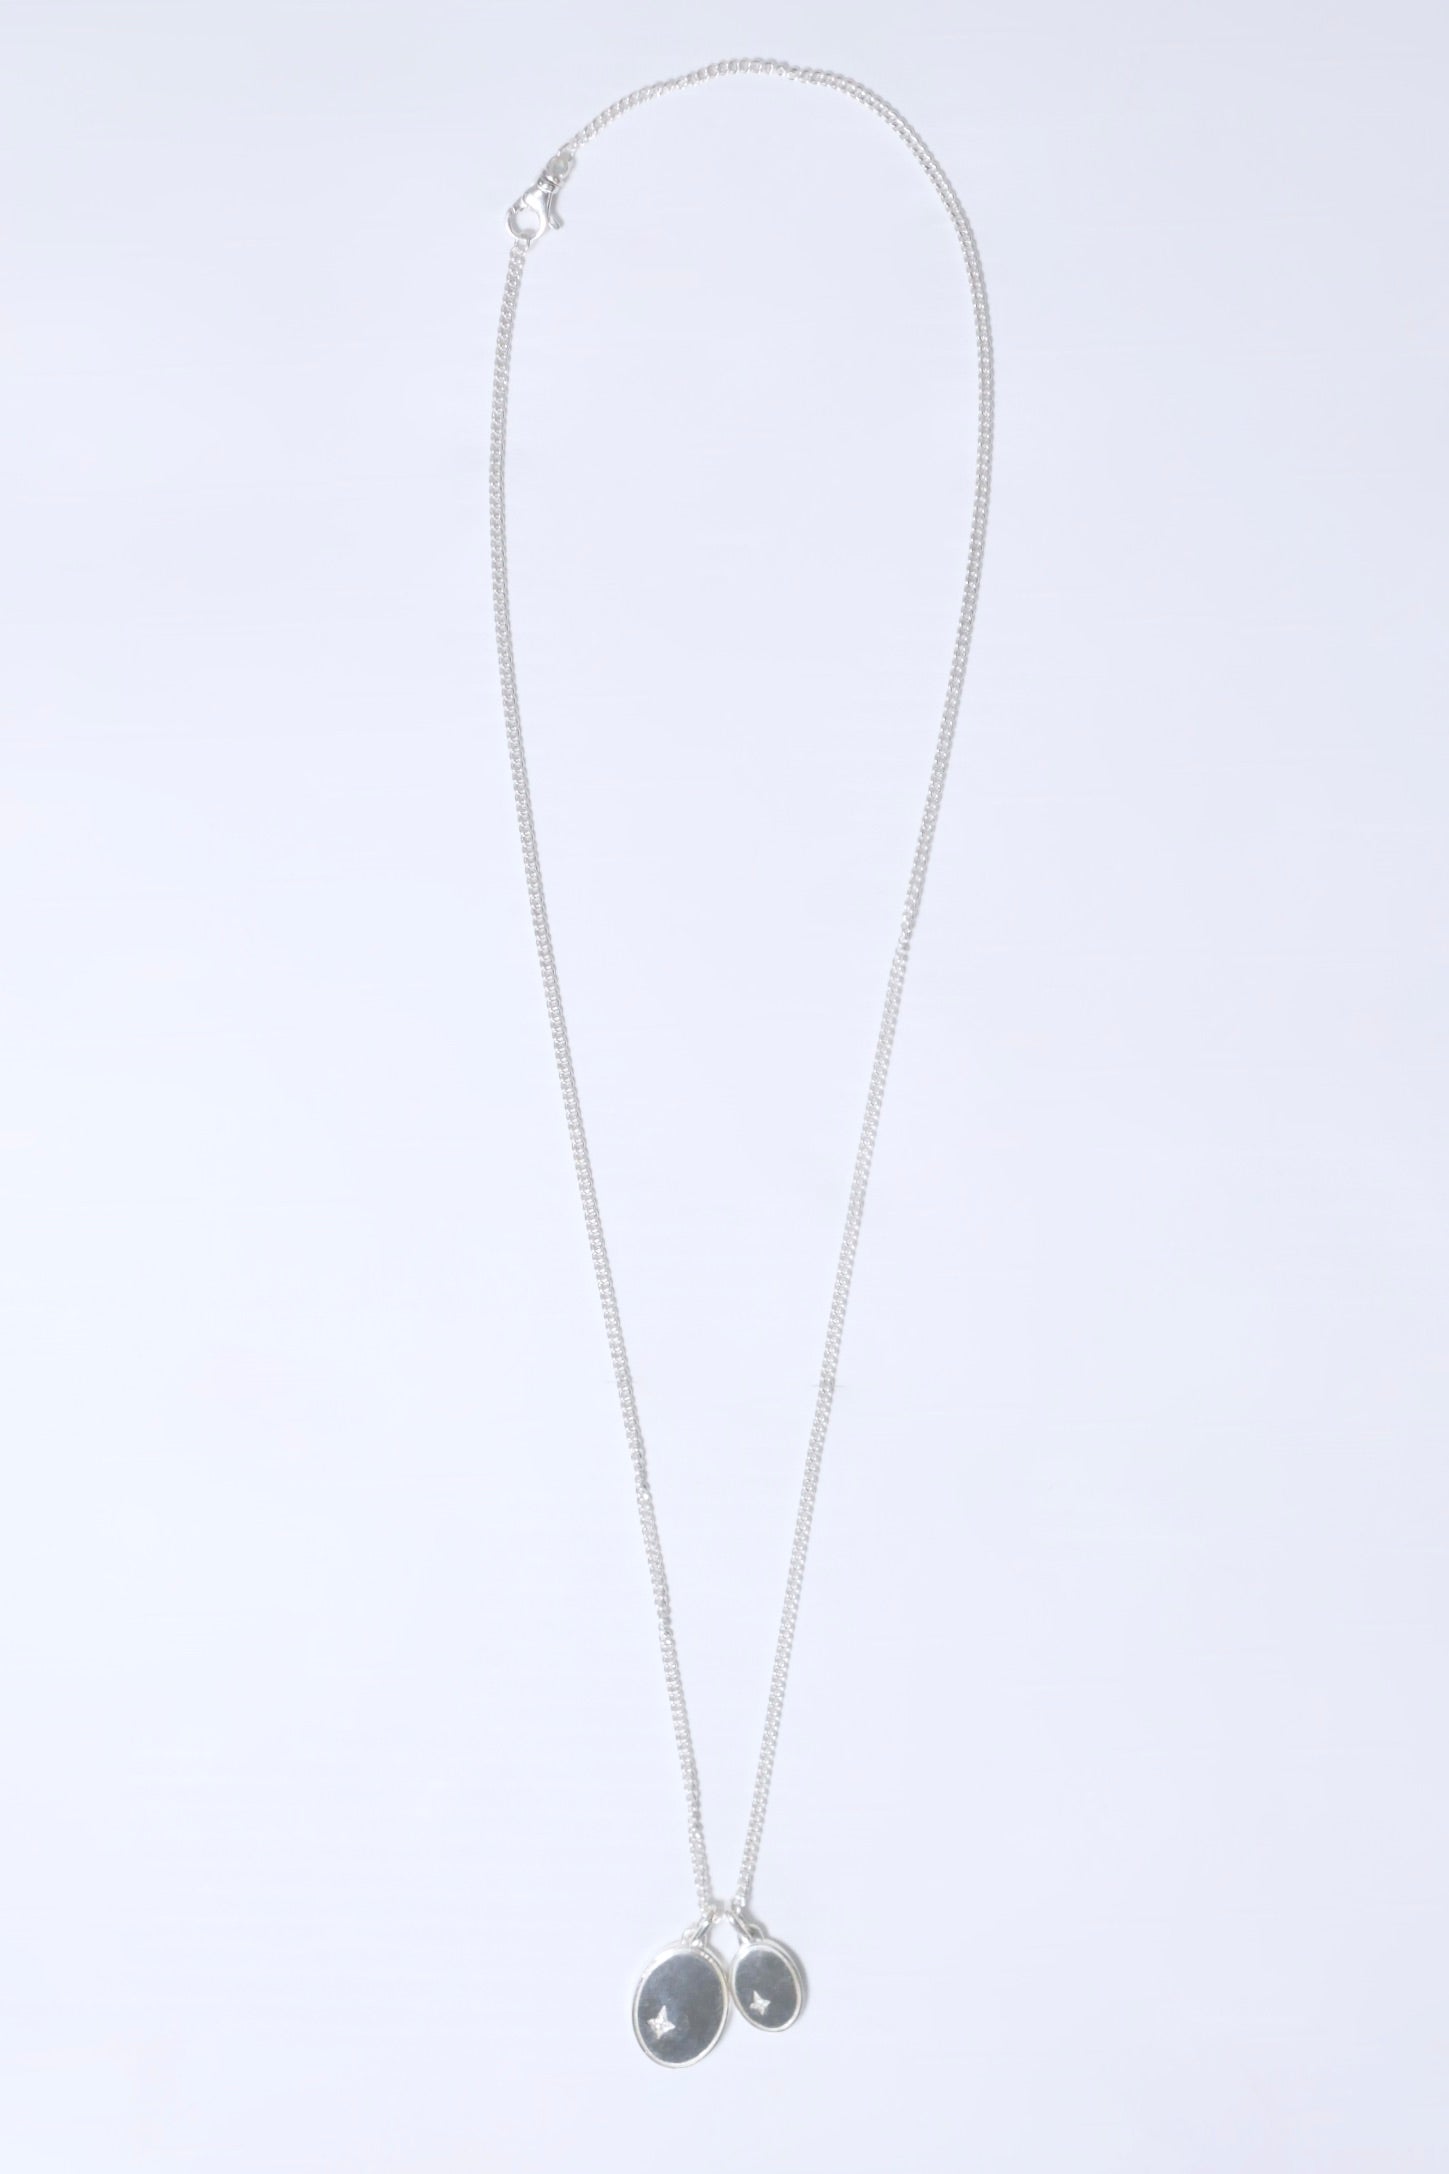 M.Cohen by MAOR Gudo Oval with Diamond Necklace - Silver